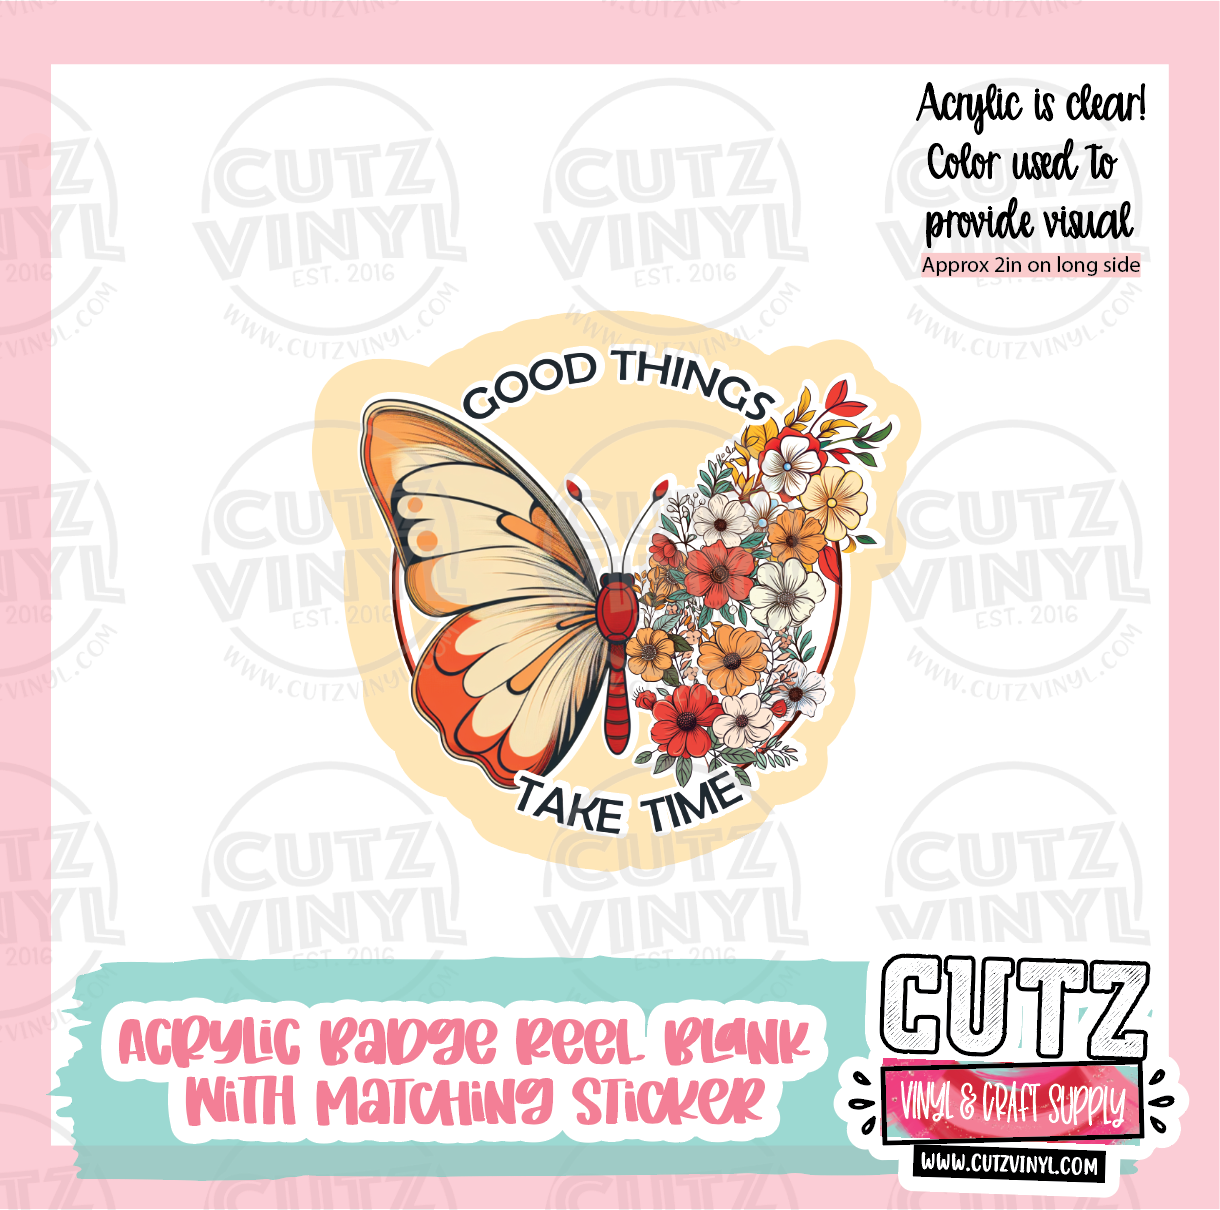 Good Things Take Time - Acrylic Badge Reel Blank and Matching Sticker